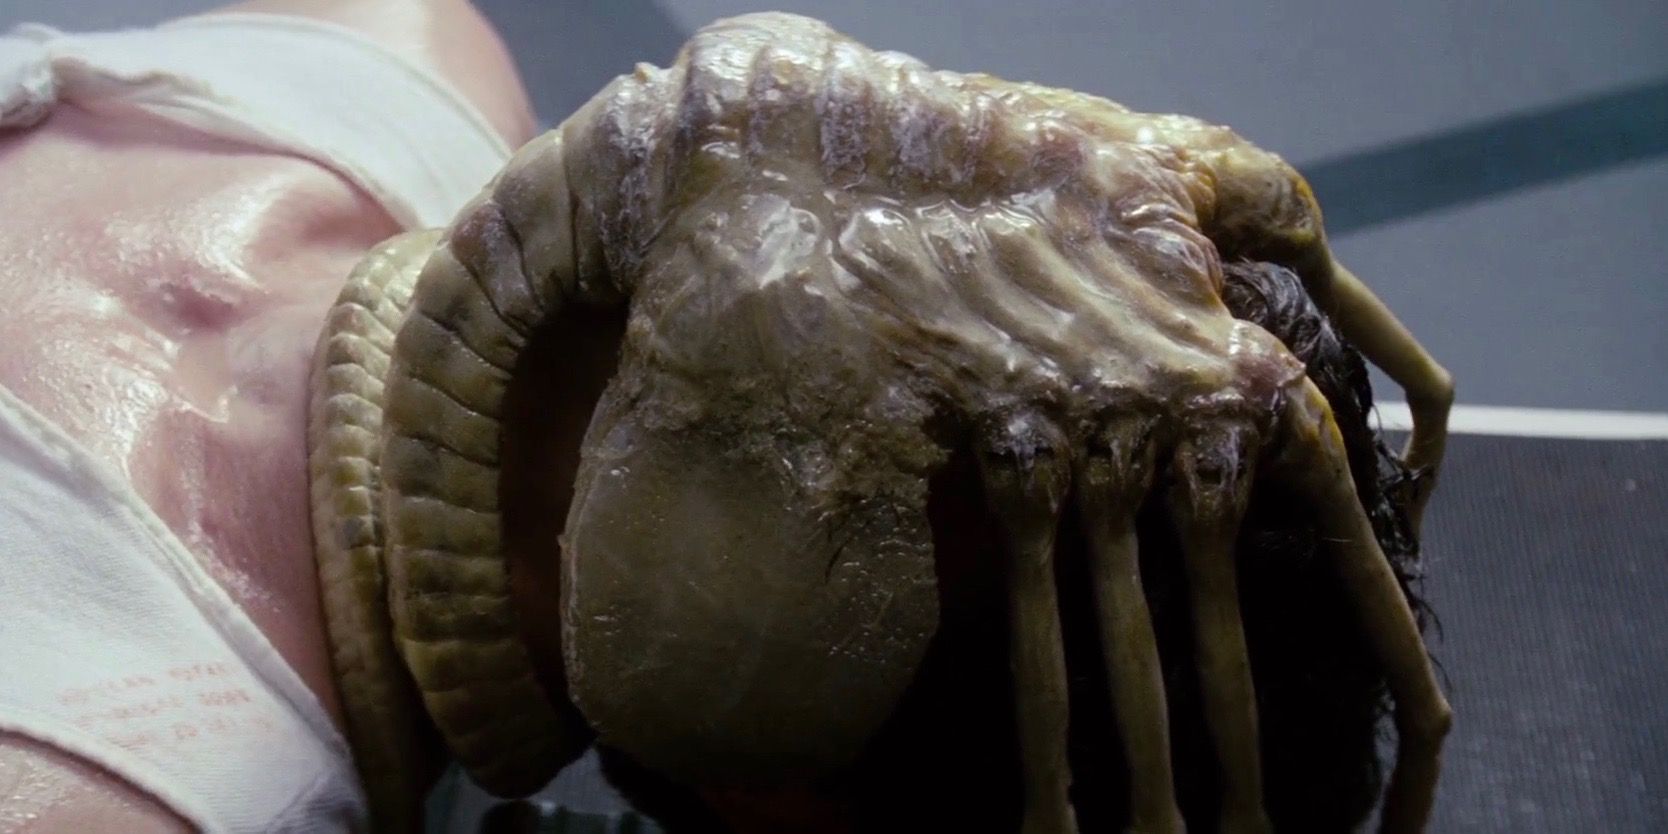 Every Xenomorph Variant In Alien Movies (& How They Were Made)